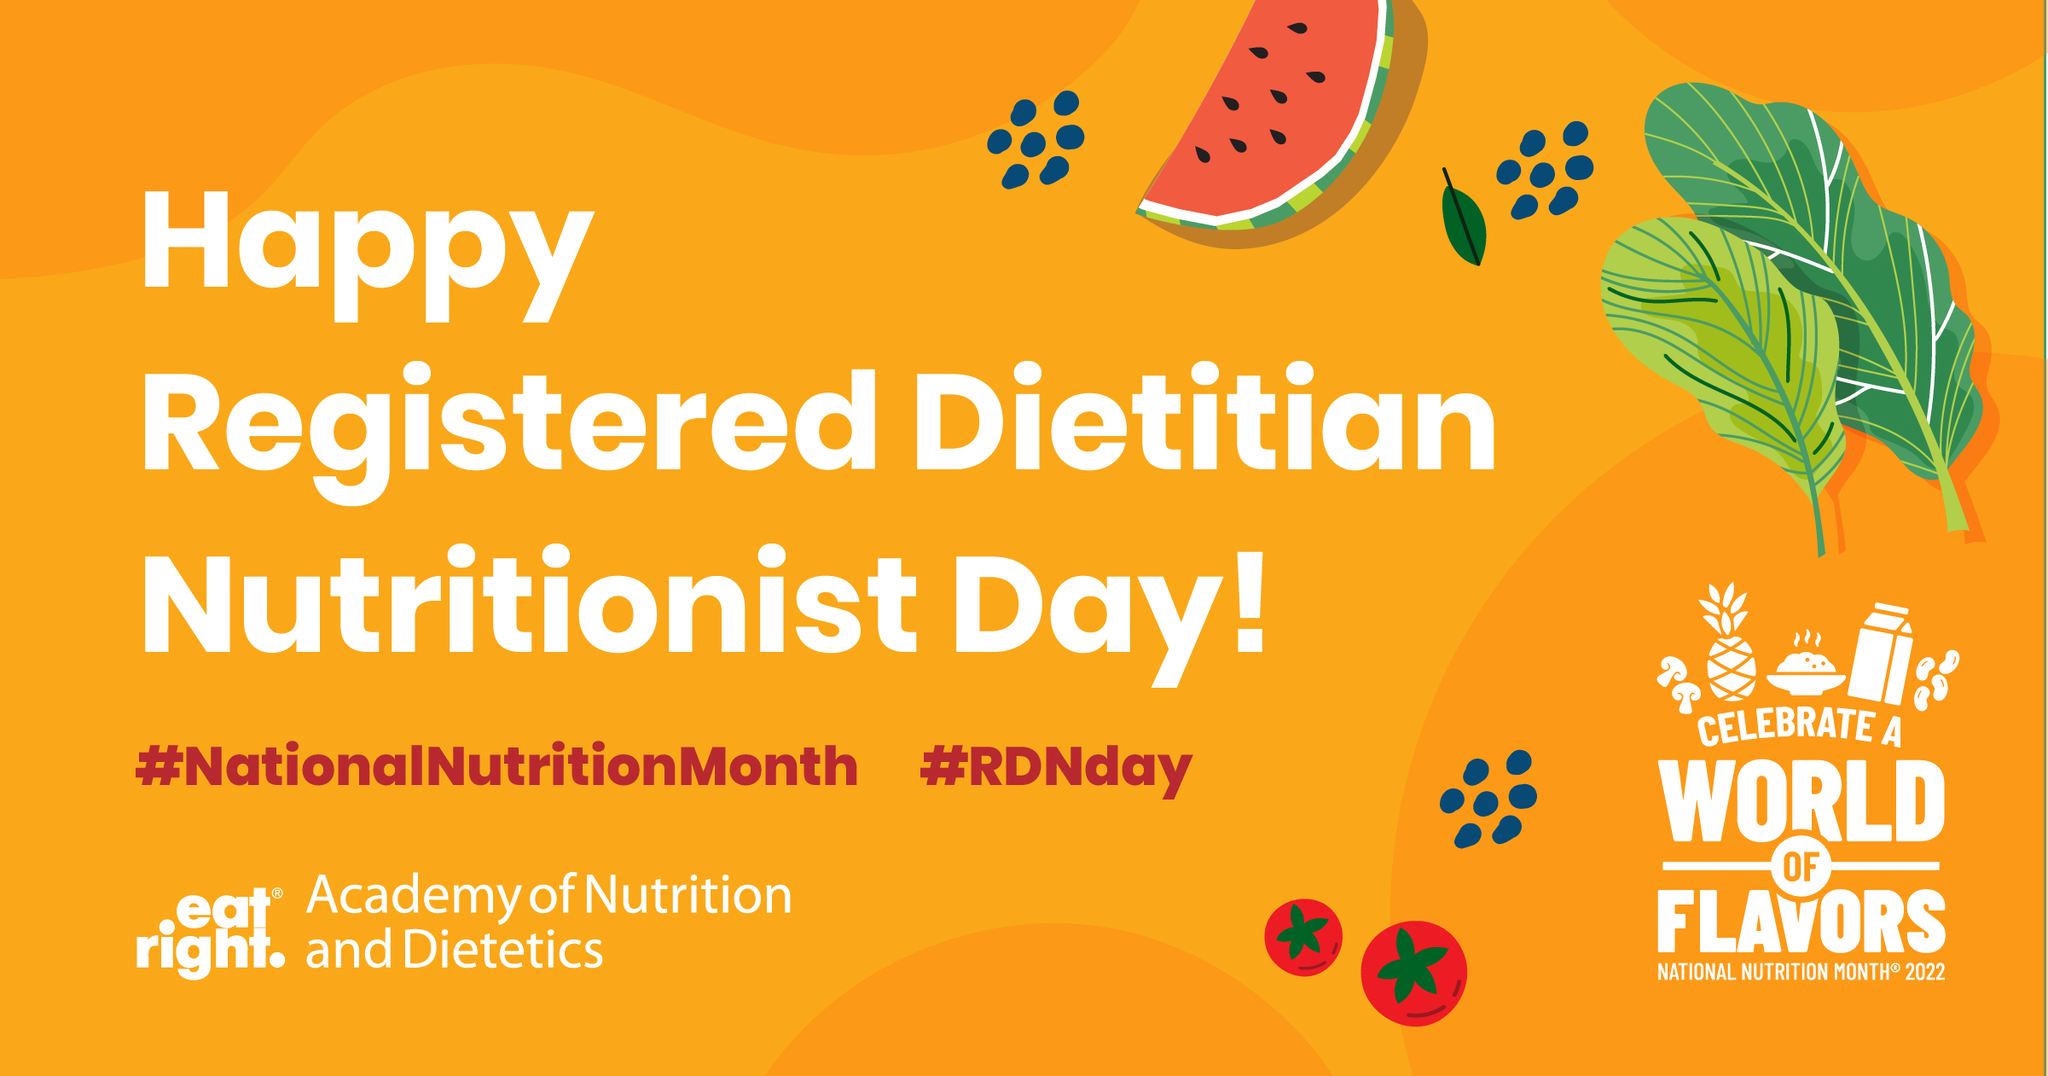 Happy Registered Dietitian Nutritionist Day! MFHS